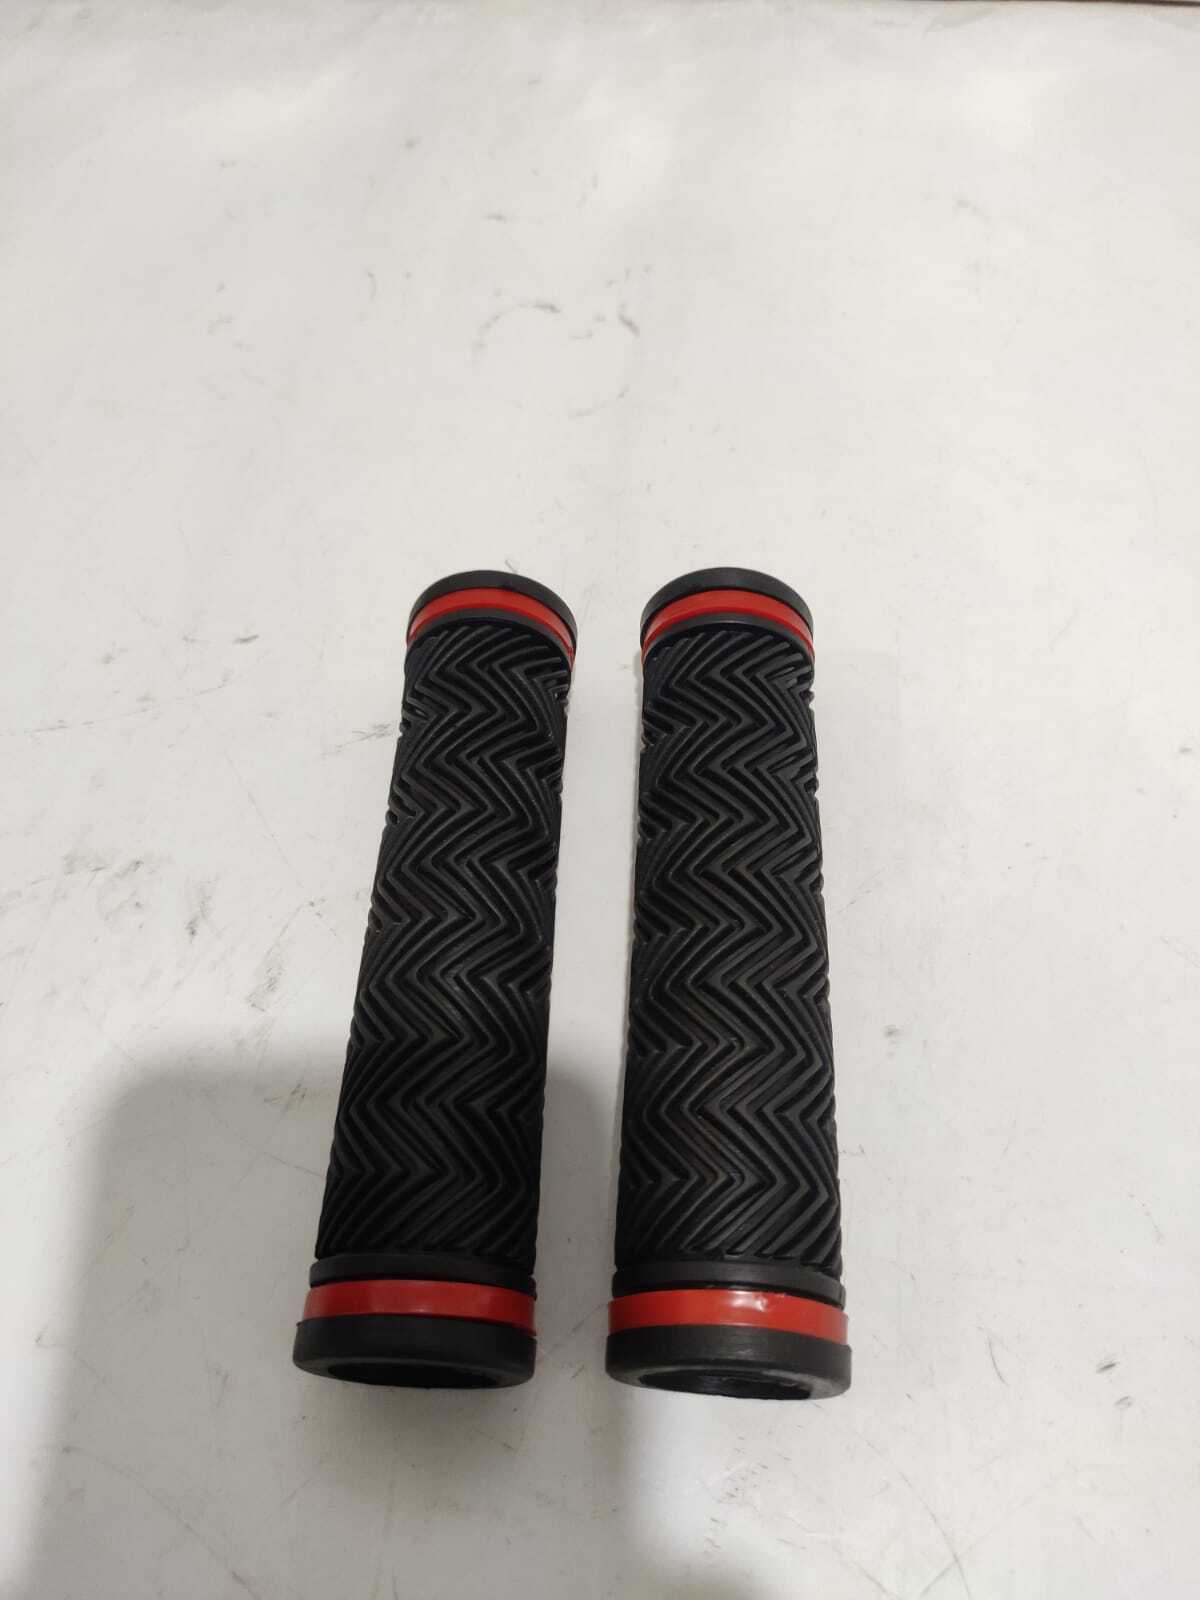 BICYCLE HANDLE GRIP COLOURED   120 MM